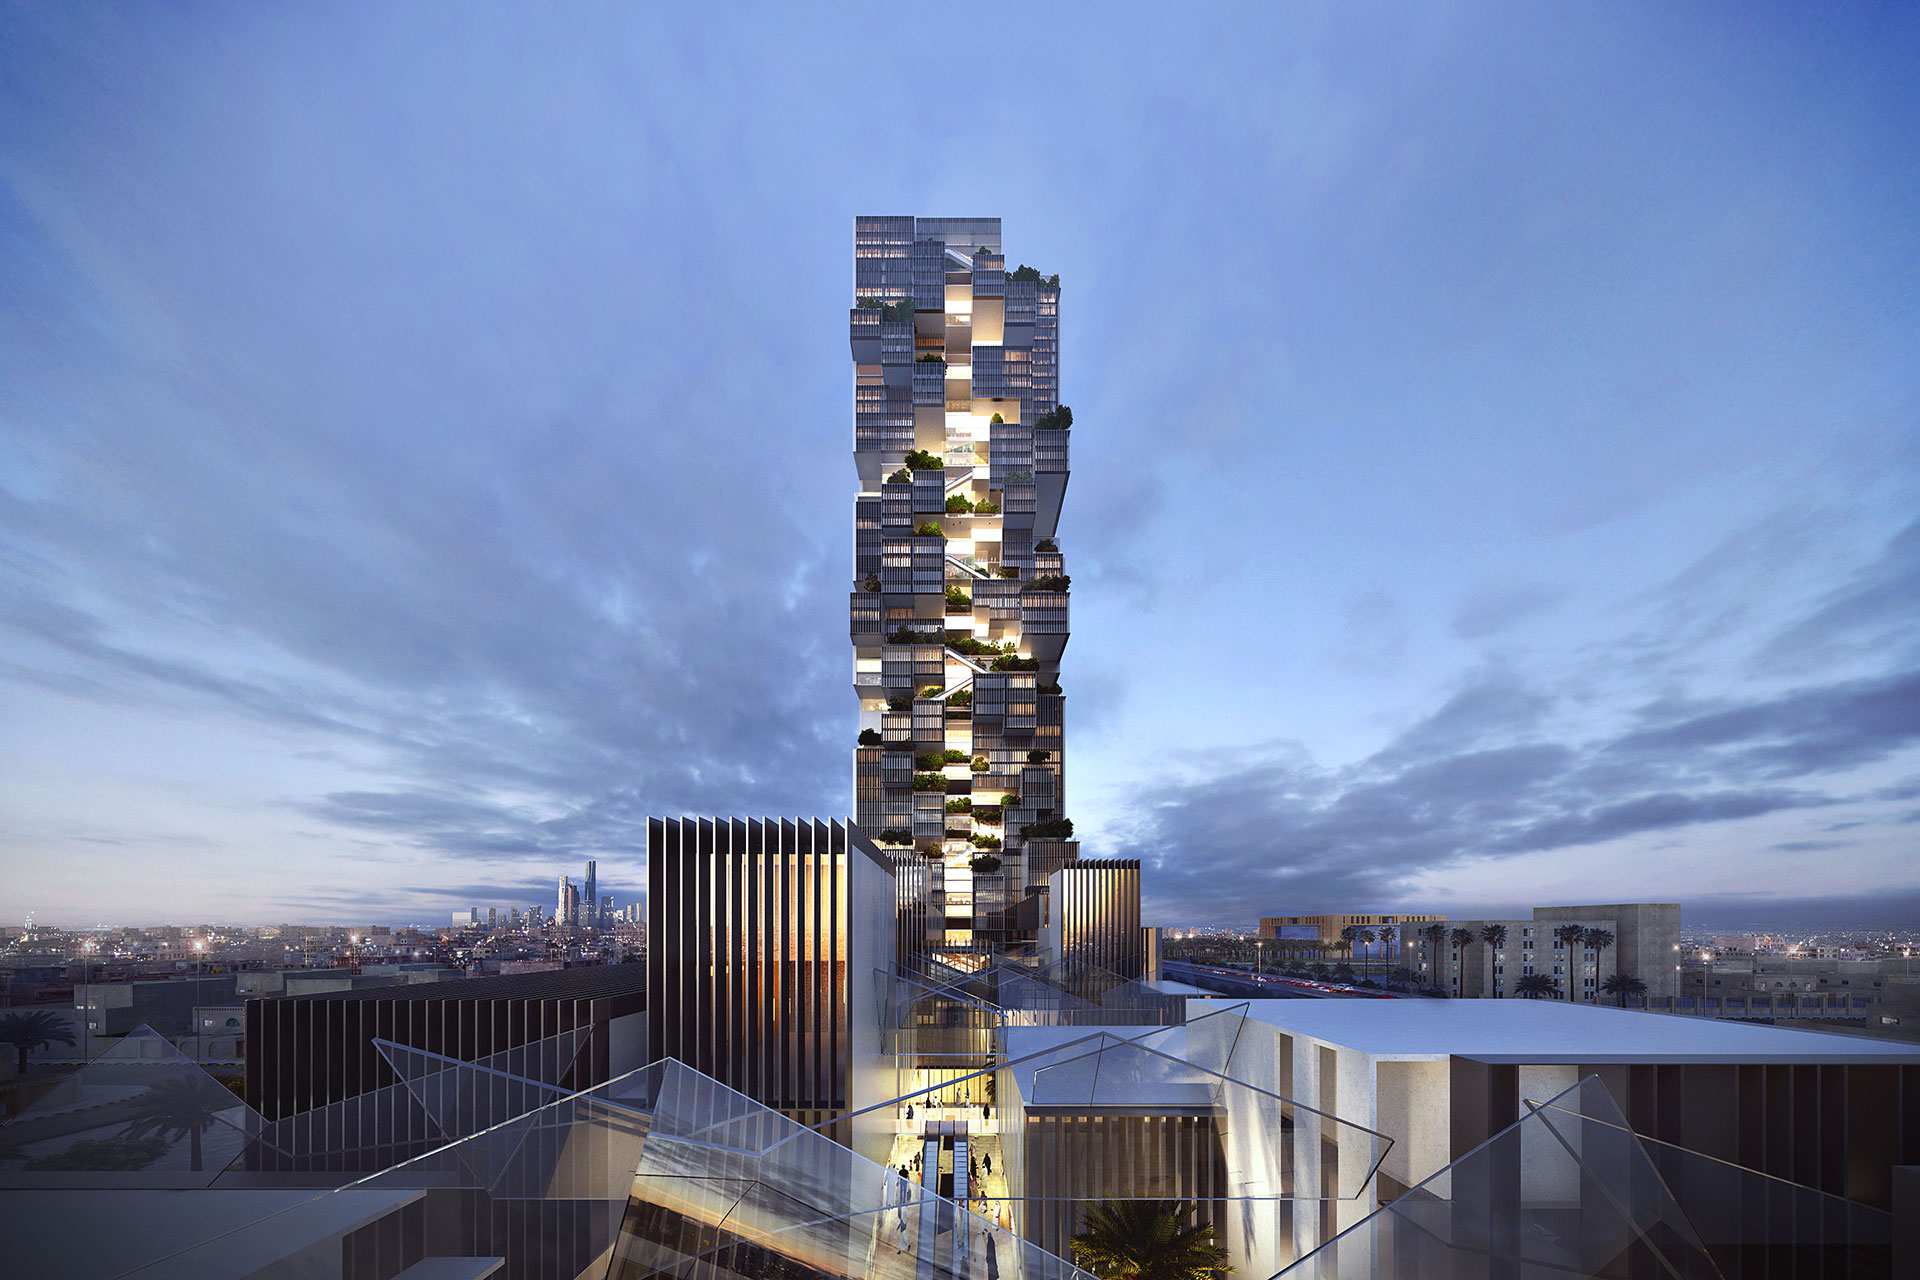 Mixed-Use Building / 109 Architects